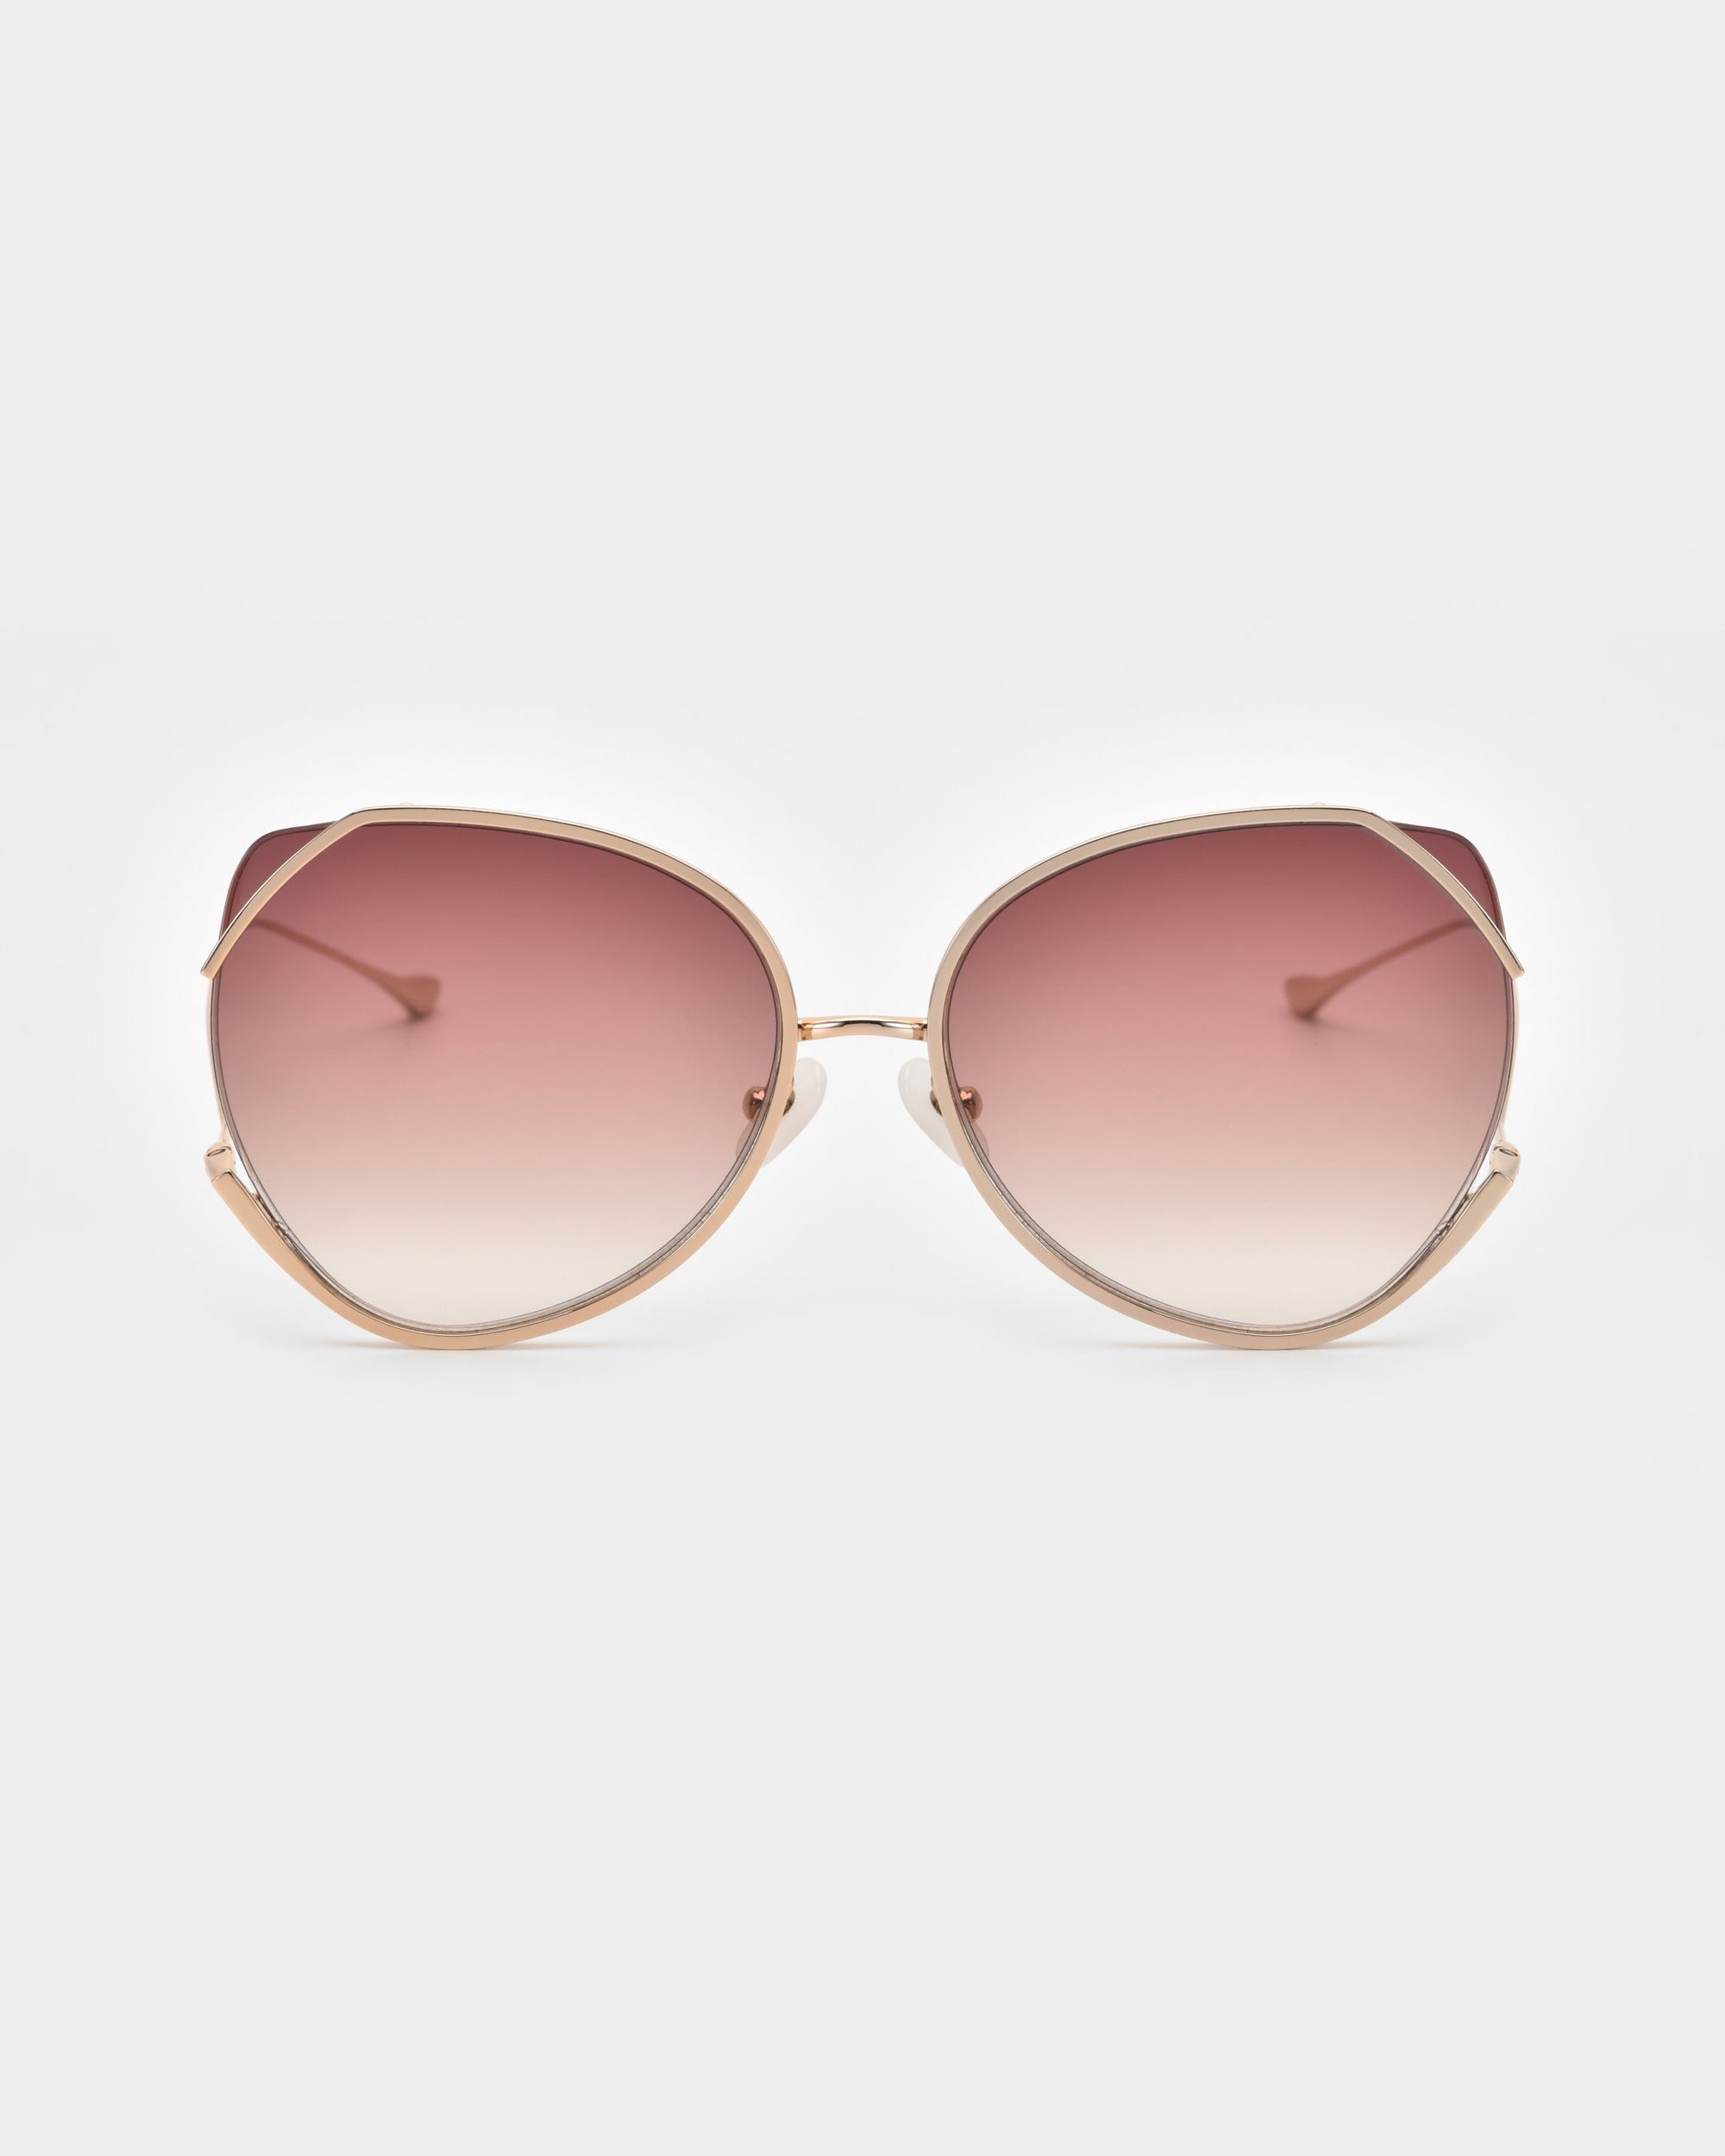 A pair of Wonderland by For Art&#39;s Sake® stylish sunglasses with large, round lenses that transition from pink at the top to clear at the bottom. Featuring jadestone nose pads for comfort and UV protection, these sunglasses have a thin, gold metal frame and slightly curved temples, all set against a plain white background.